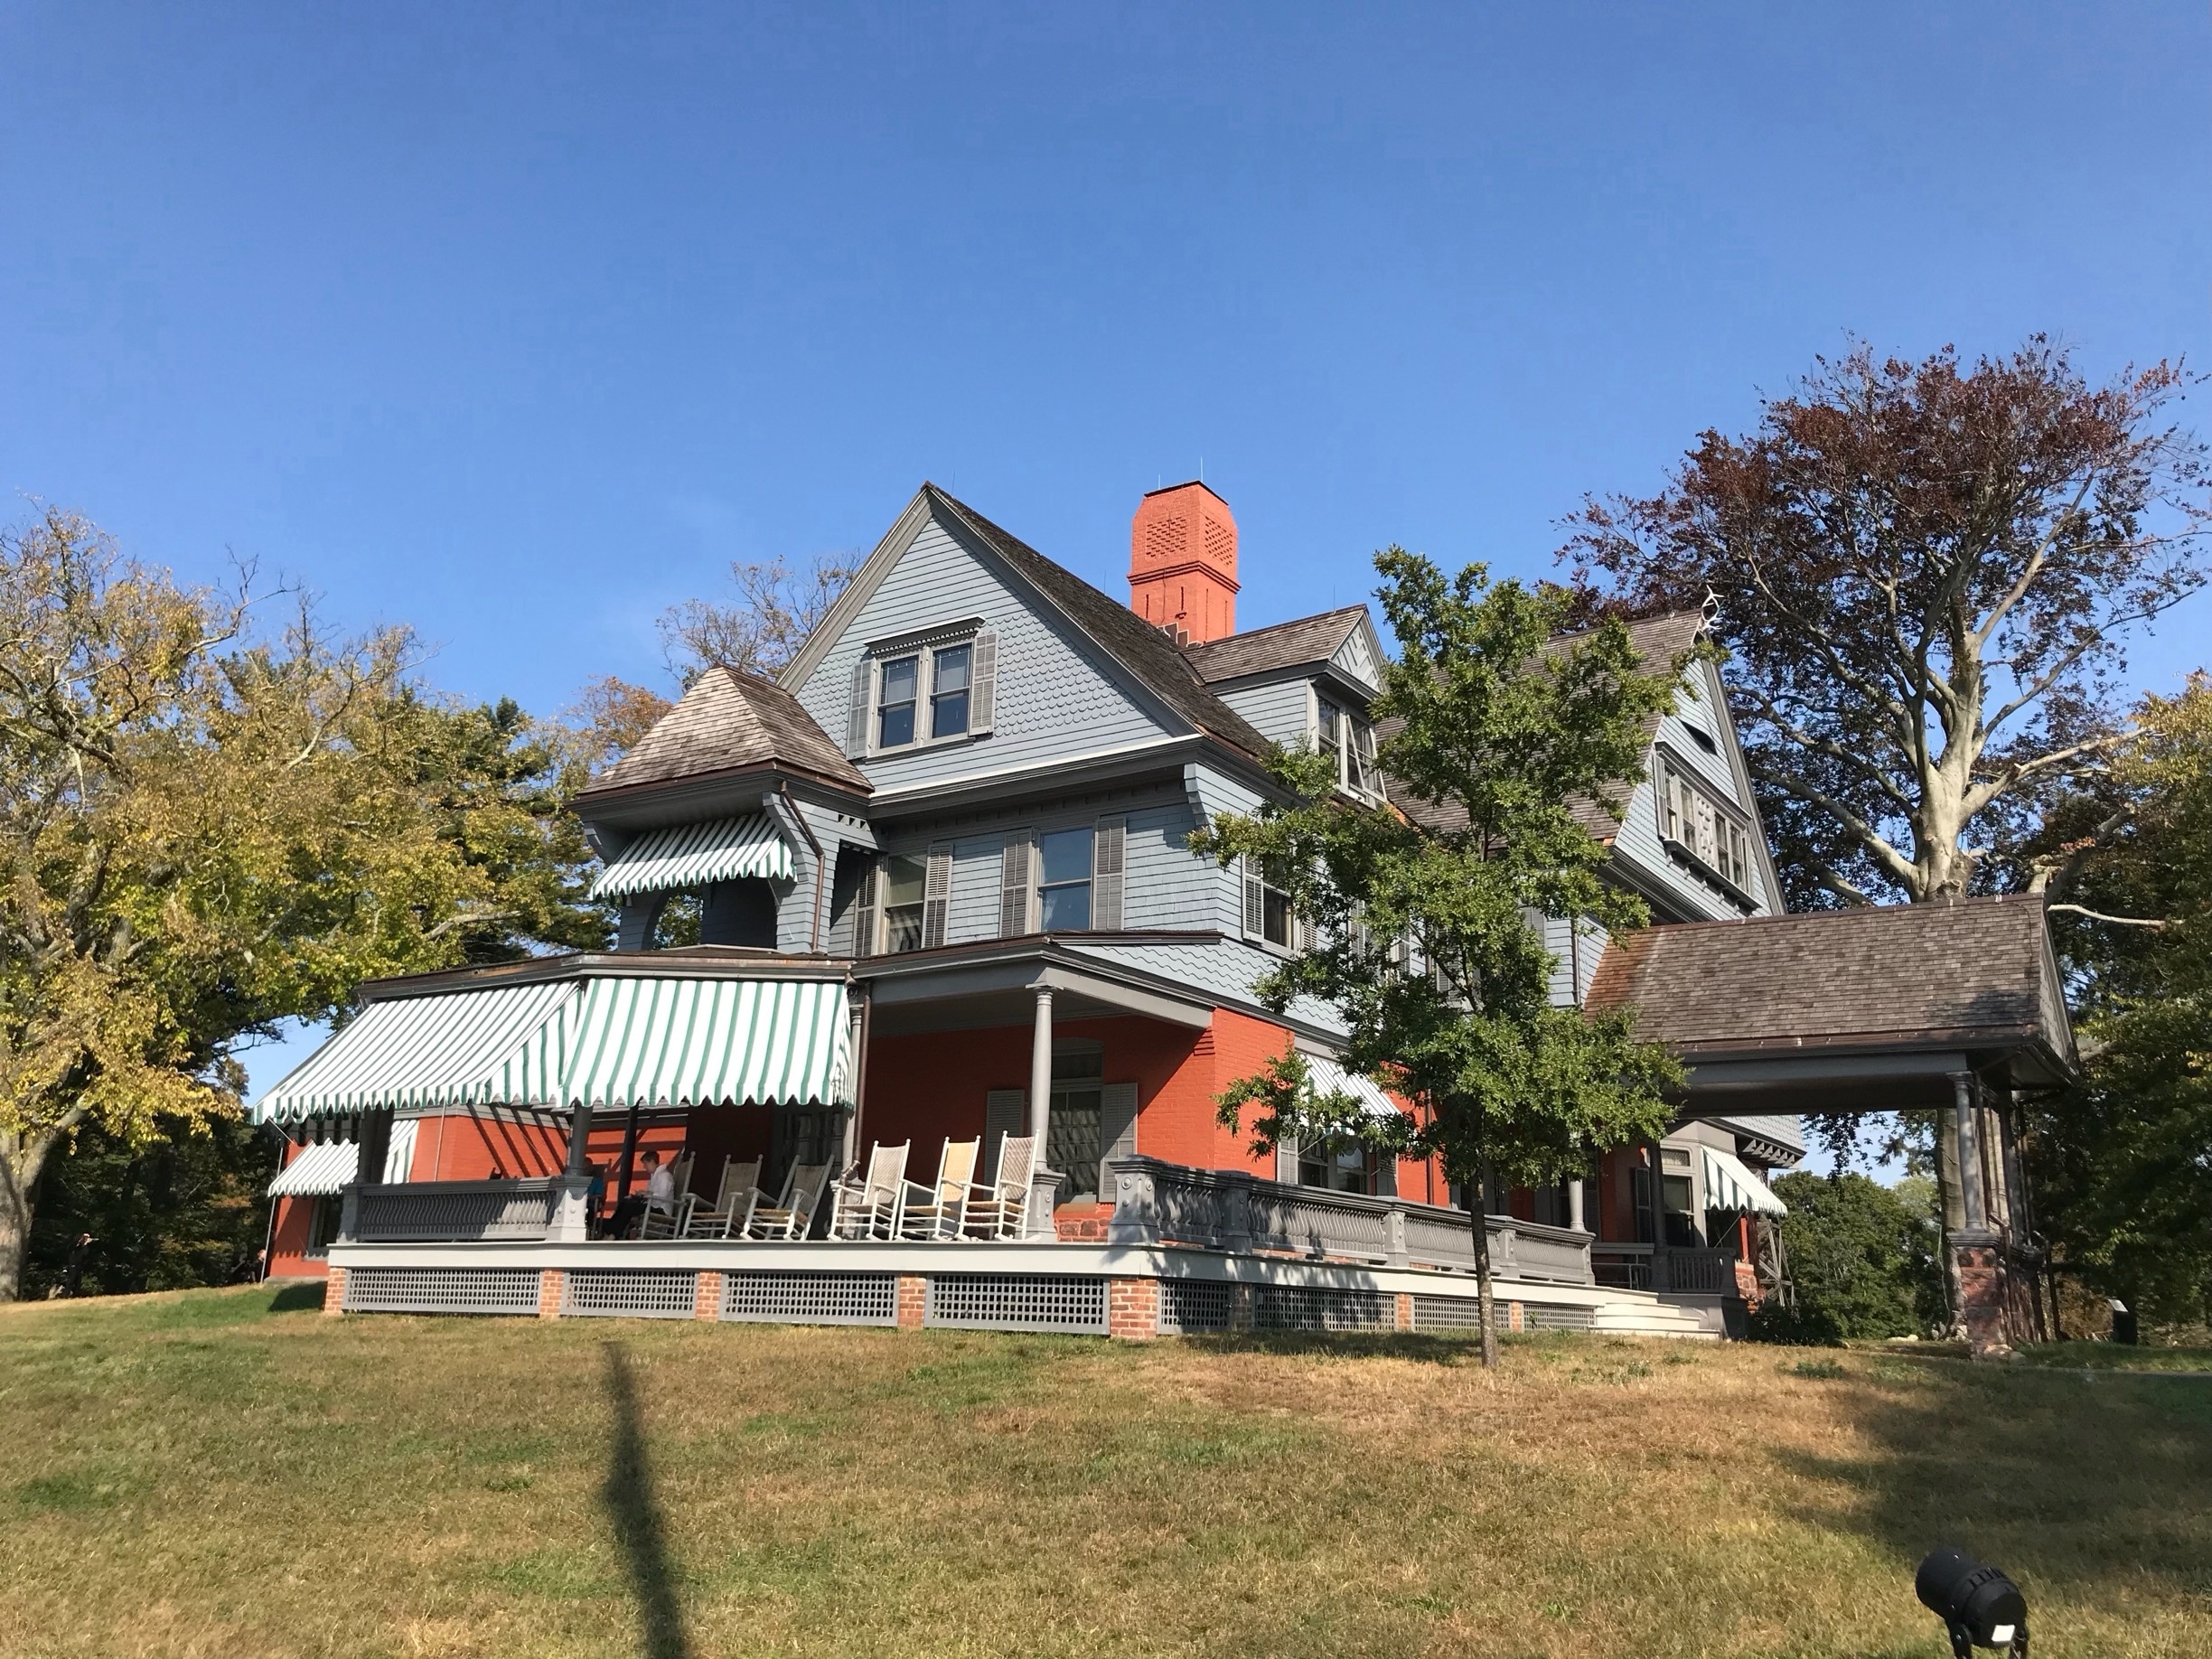 Theodore Roosevelt’s Home in Oyster Bay